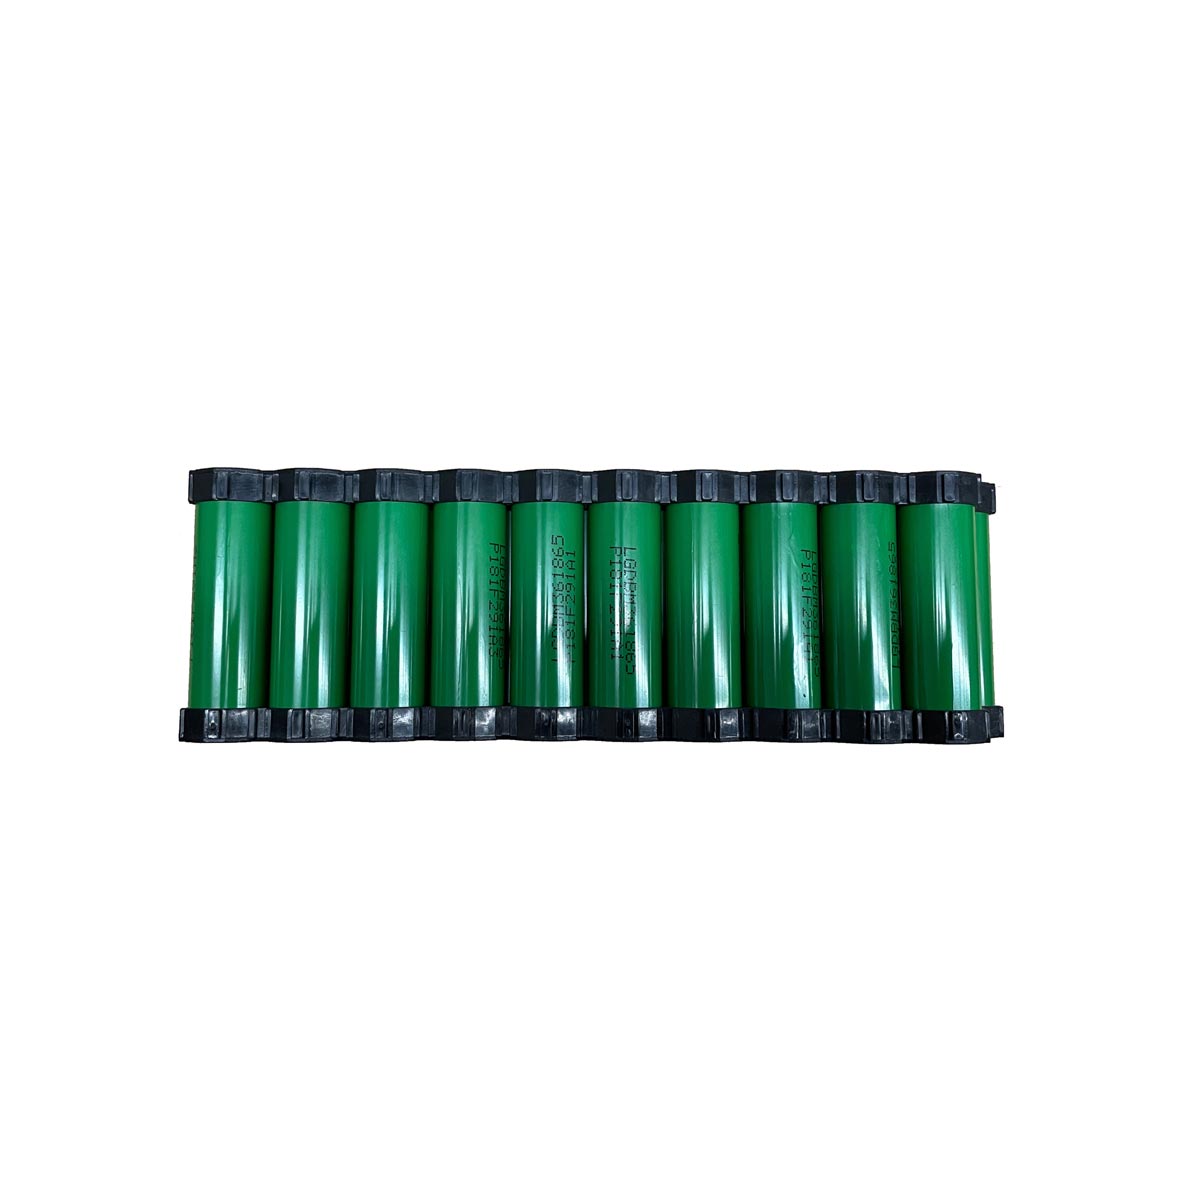 Honeycomb Holders for 18650 Batteries, 10 pieces